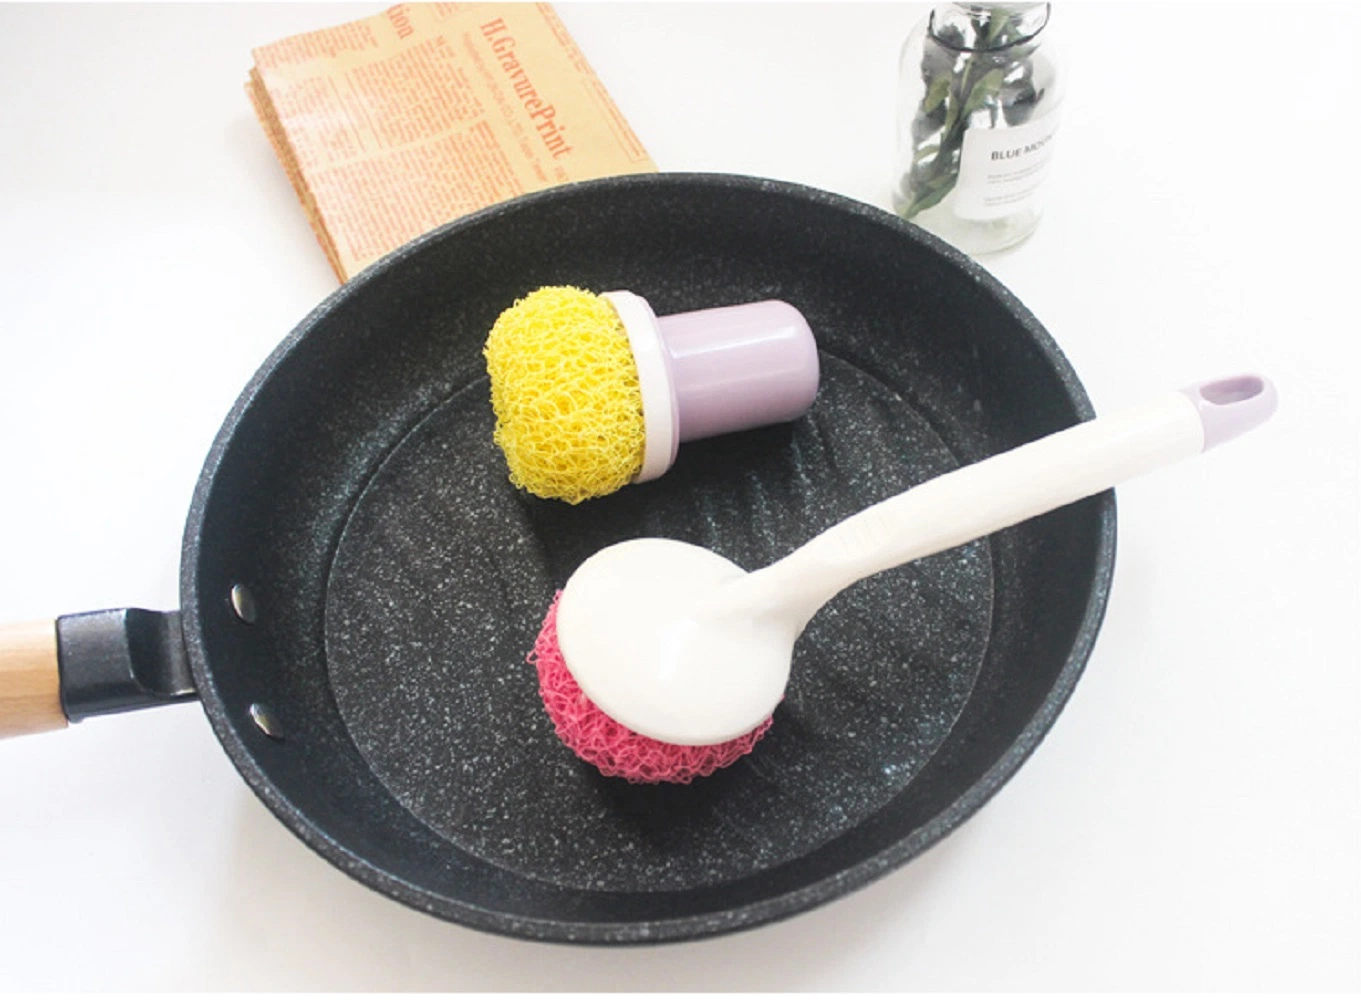 Dish Scrubber - Short or Long Handle Scouring Pad - Polyester Sponge for Pot, Pan, Plate, for Daily Use, for Cleaning Tabletop Esg11974